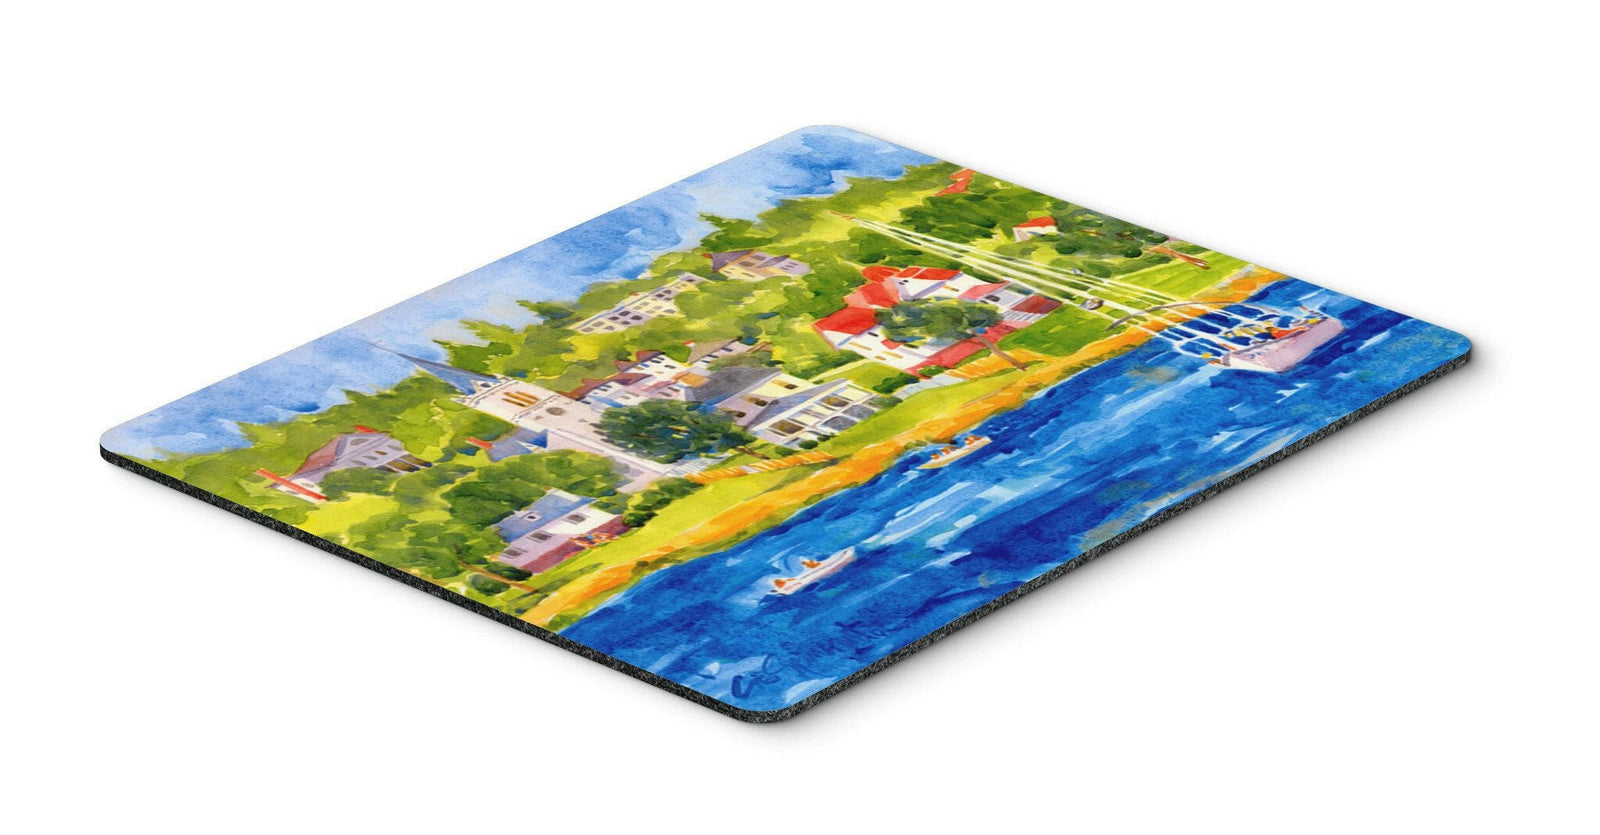 Harbour Scene with Sailboat  Mouse pad, hot pad, or trivet by Caroline's Treasures